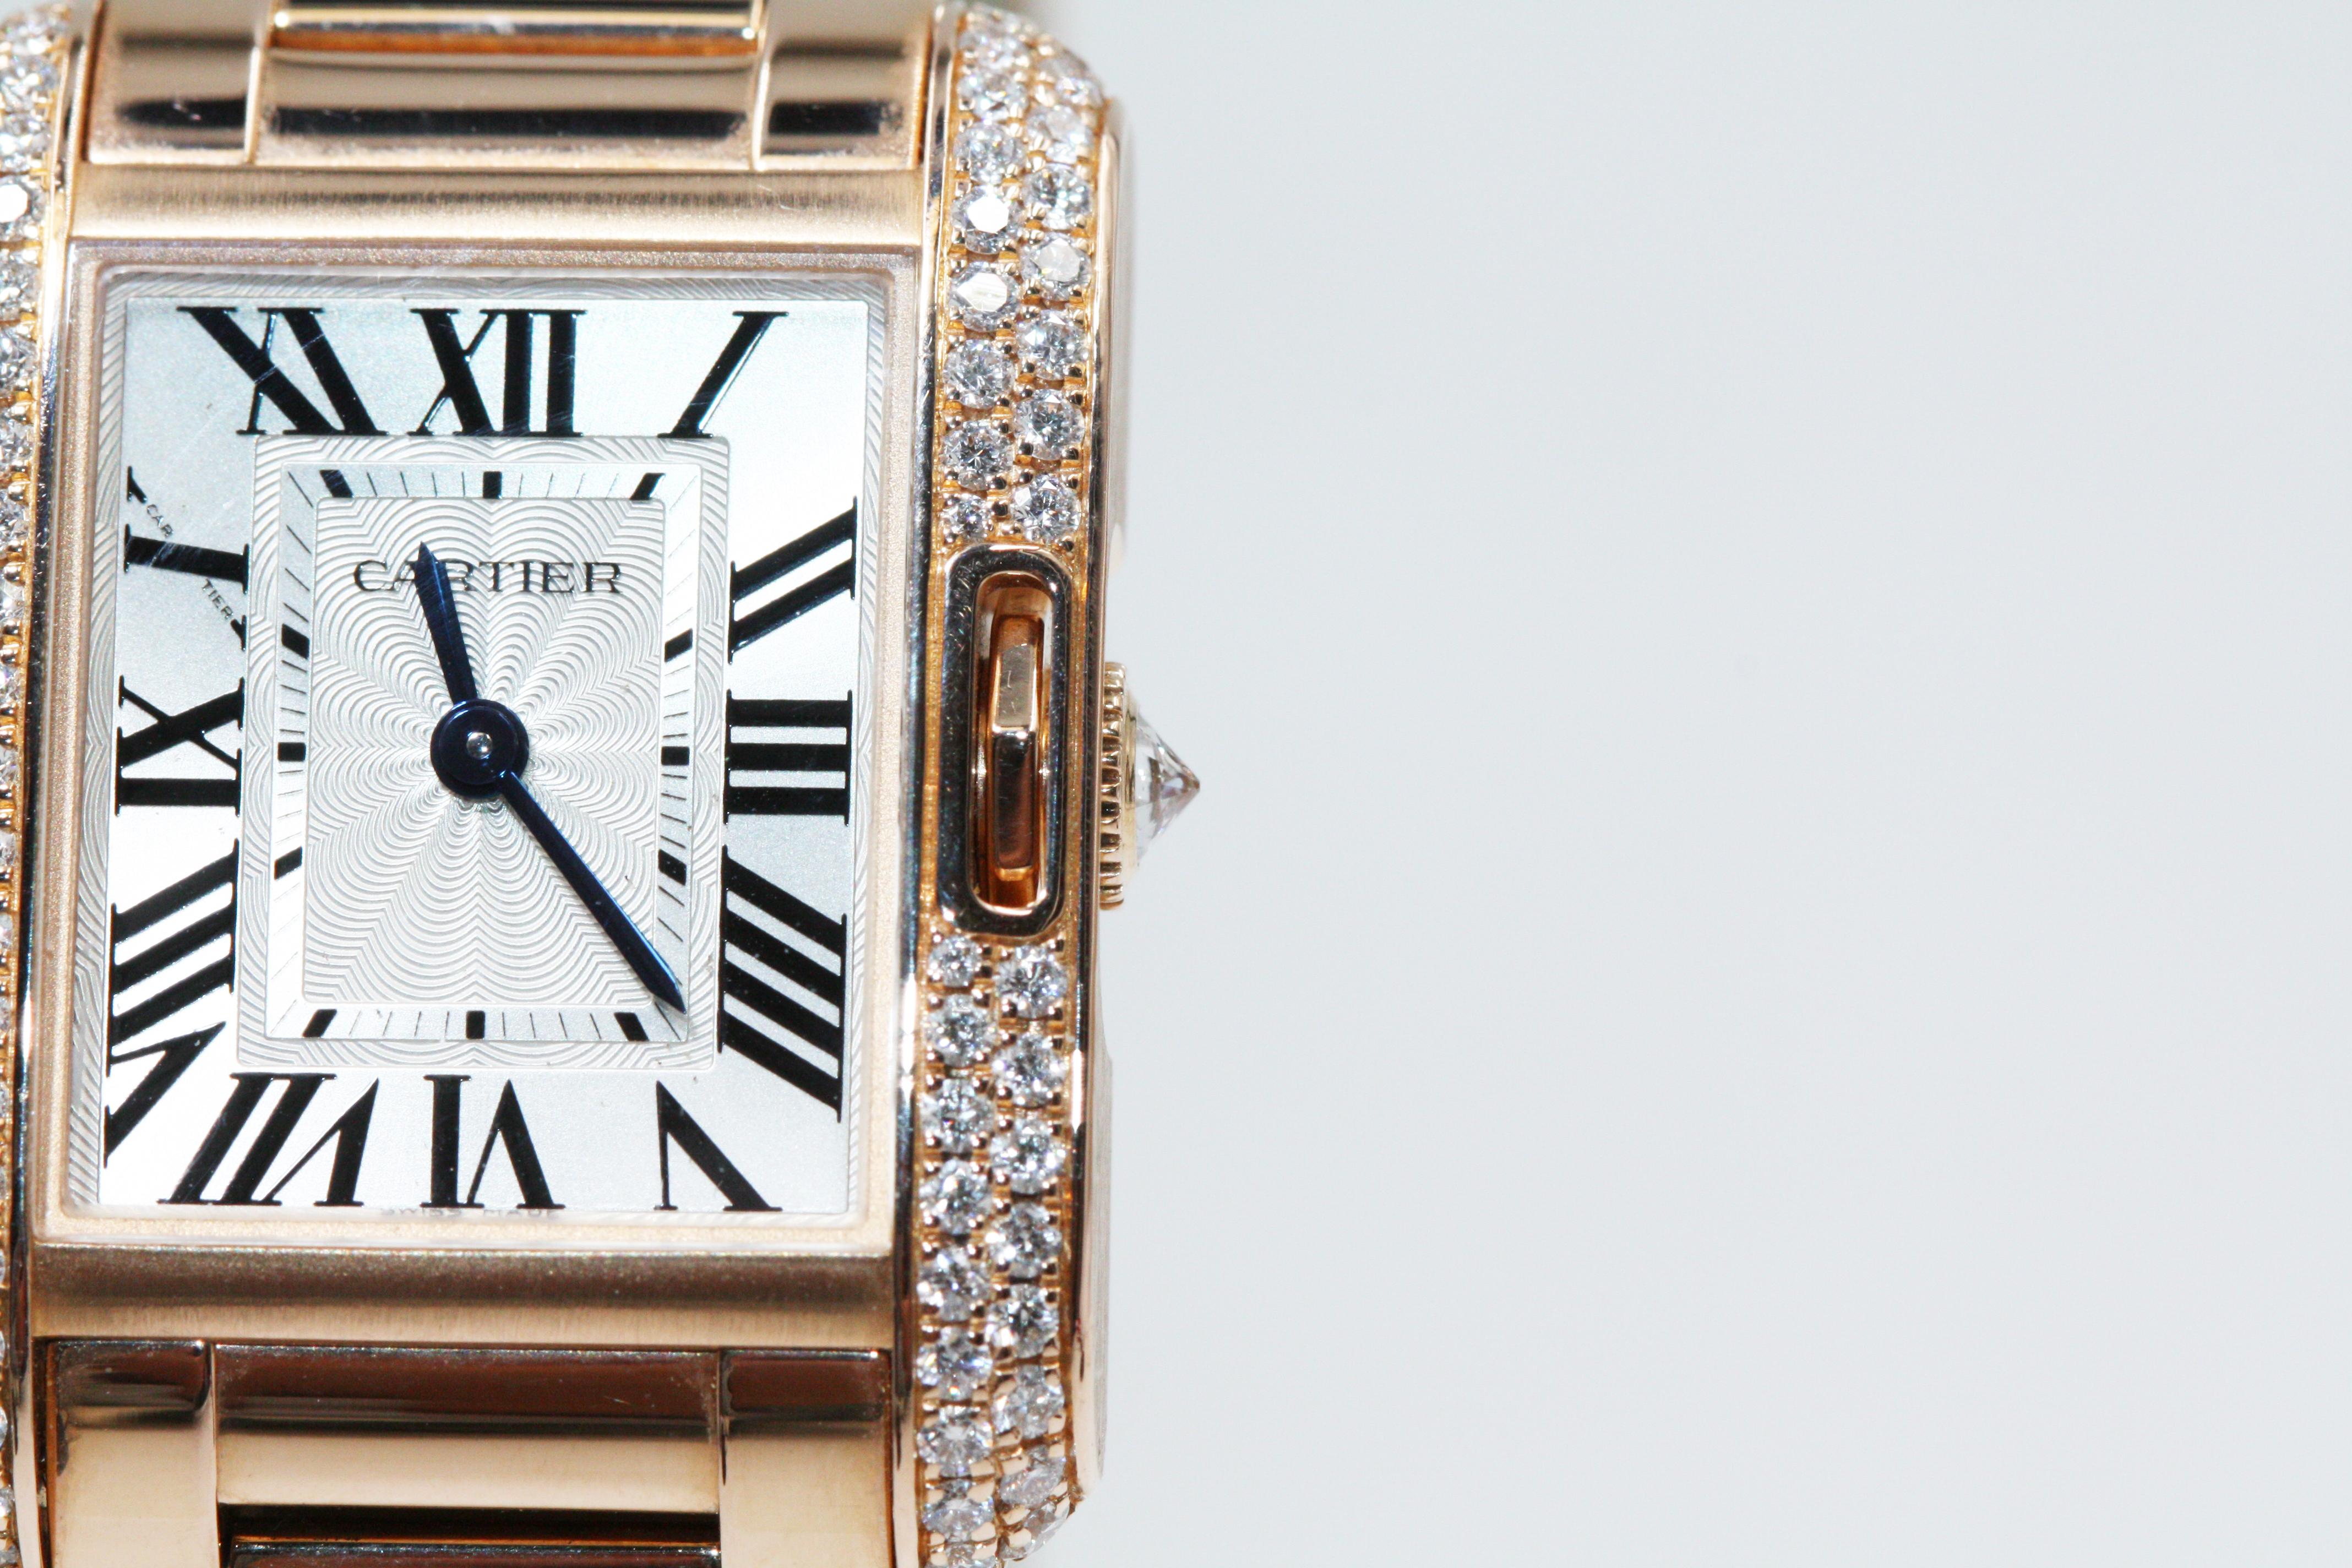 The delicacy of this watch is unparalleled, the rose gold color, the diamonds, the sapphire crystal and the design, make this watch a piece of art worthy of admiration, obviously it had to be the work of the prestigious brand Cartier, which I name